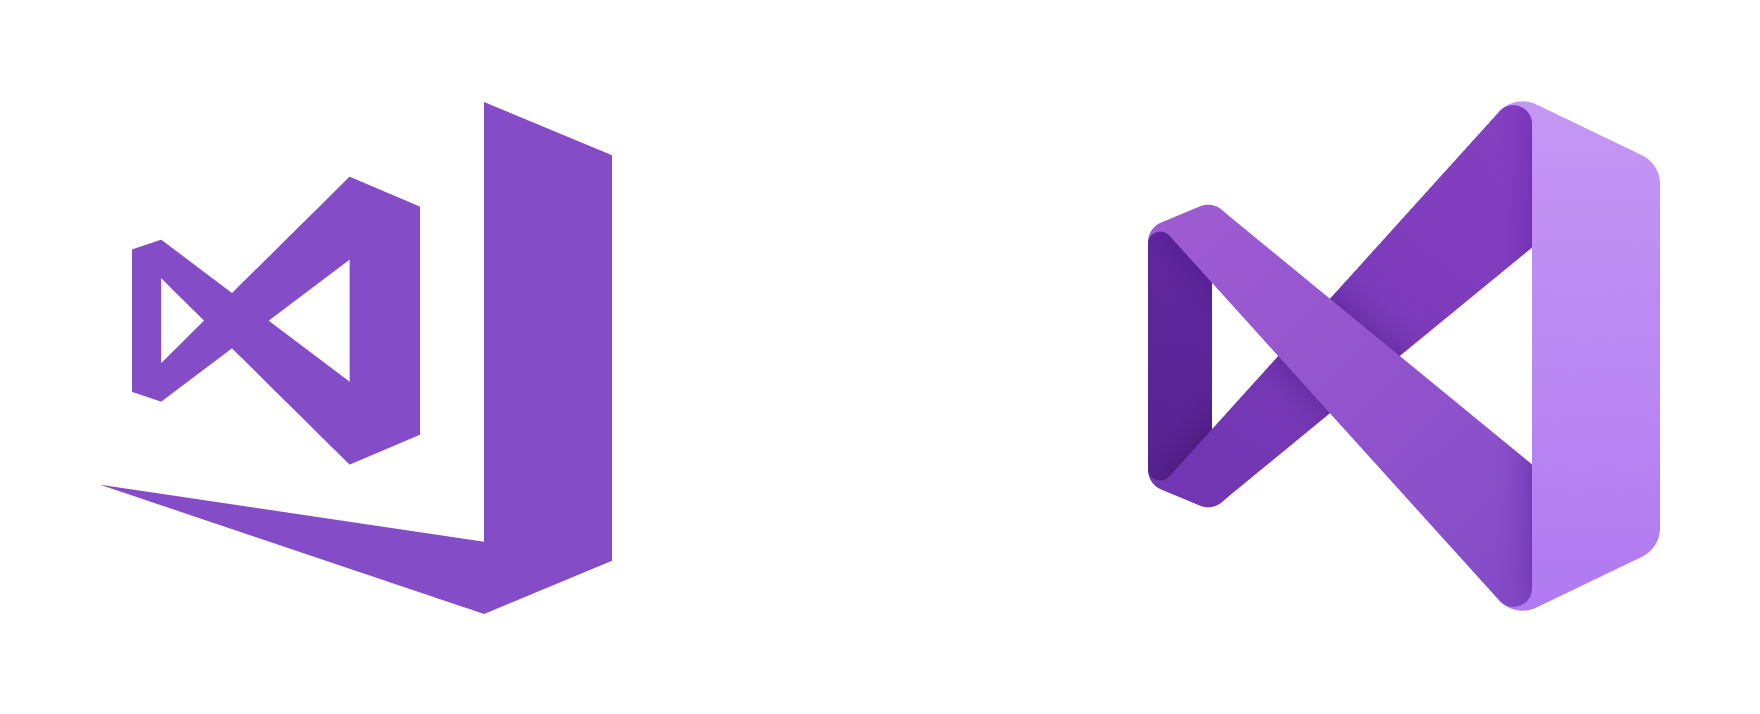 Microsoft announces availability of Visual Studio 2019 Preview 1 new-old-vs-win-icons-1.png